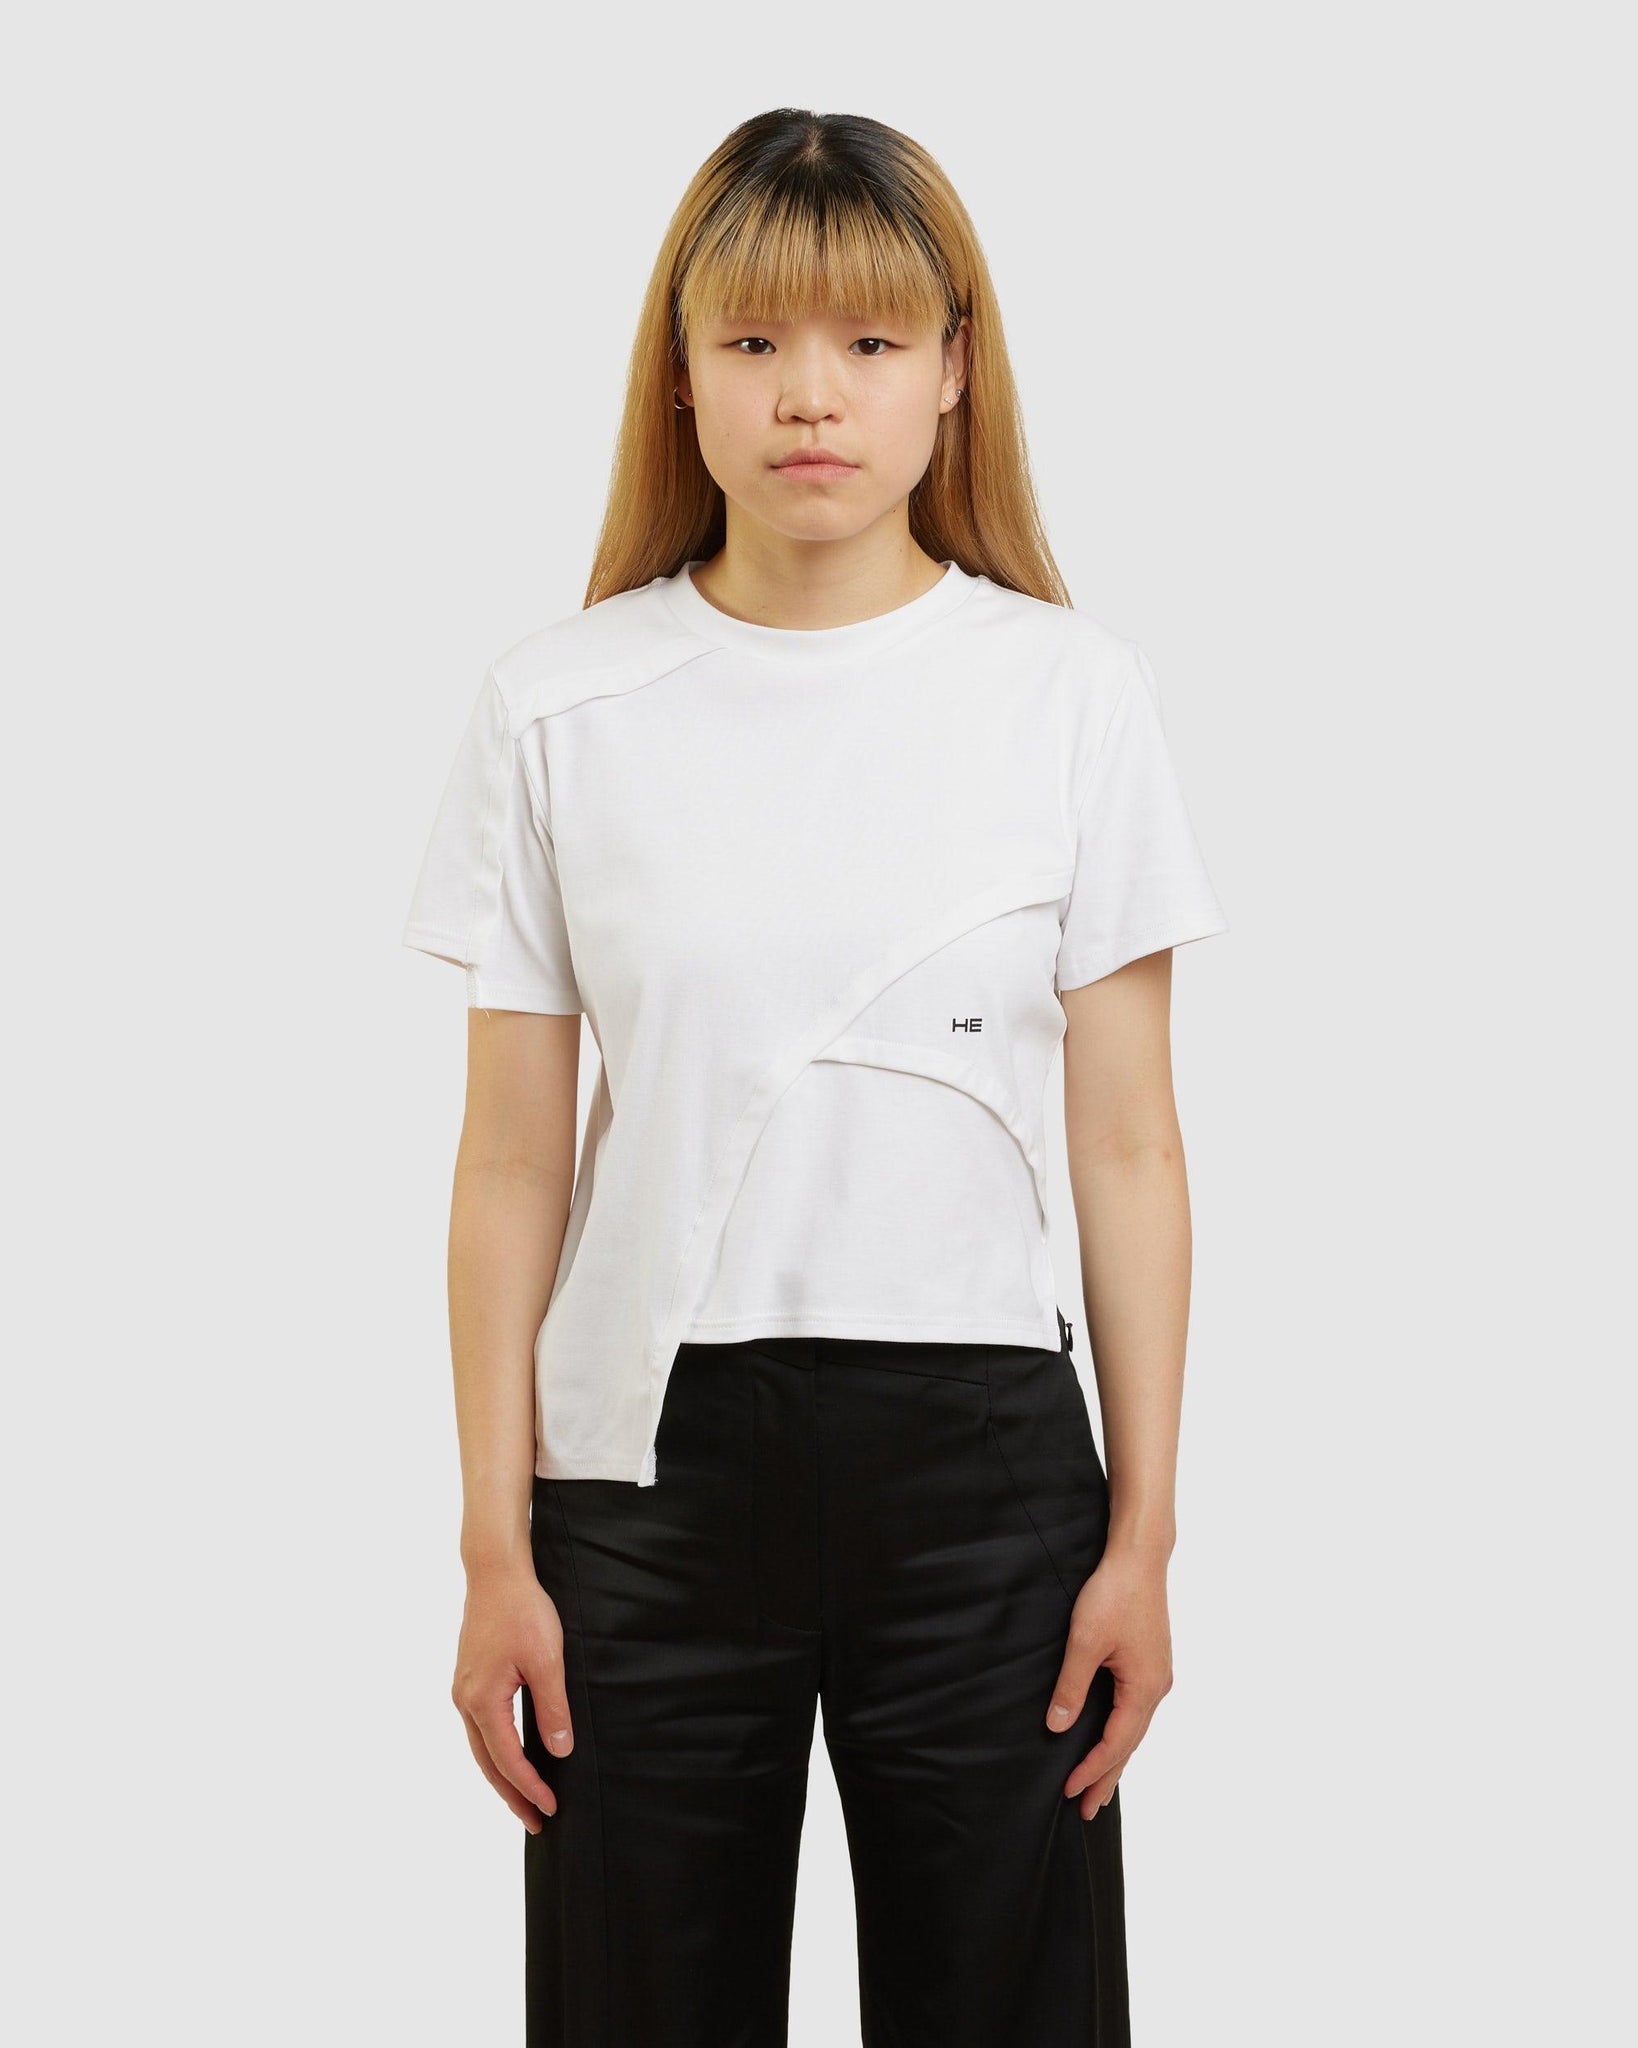 Deconstructed T-Shirt - {{ collection.title }} - Chinatown Country Club 